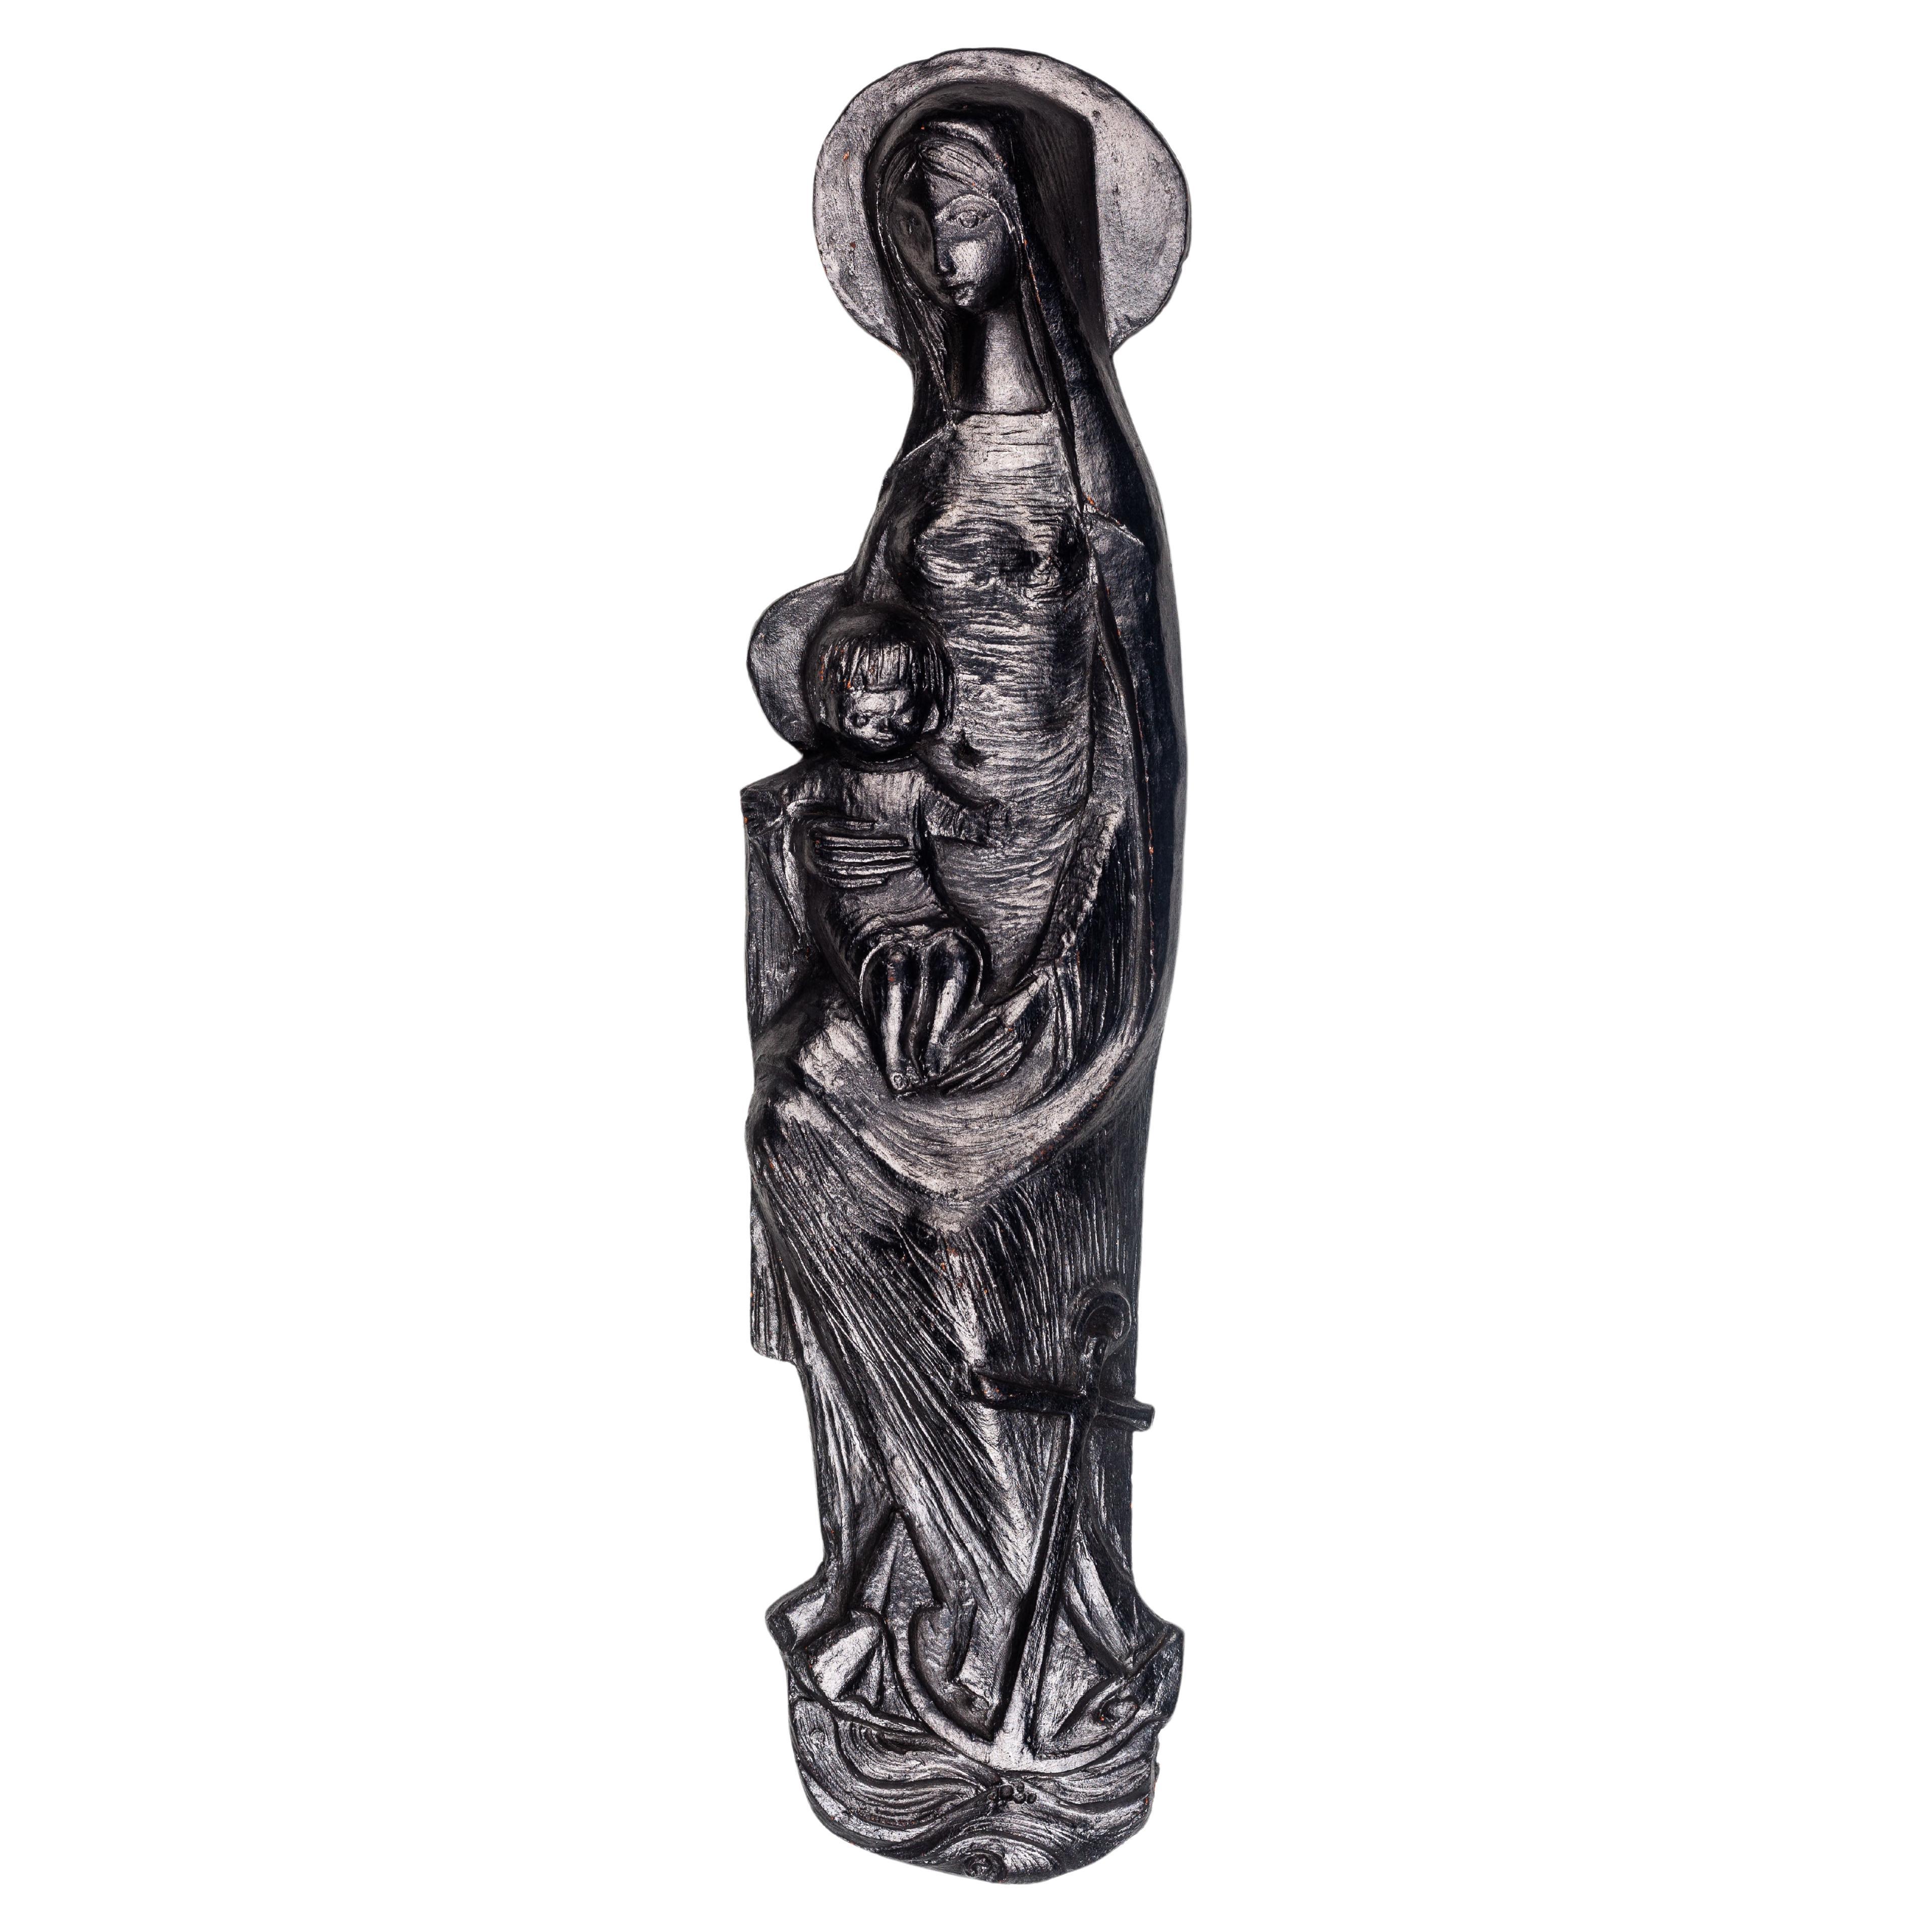 22-Inch Black Ceramic Wall Decoration - Virgin Mary with Anchor Among the Waves For Sale